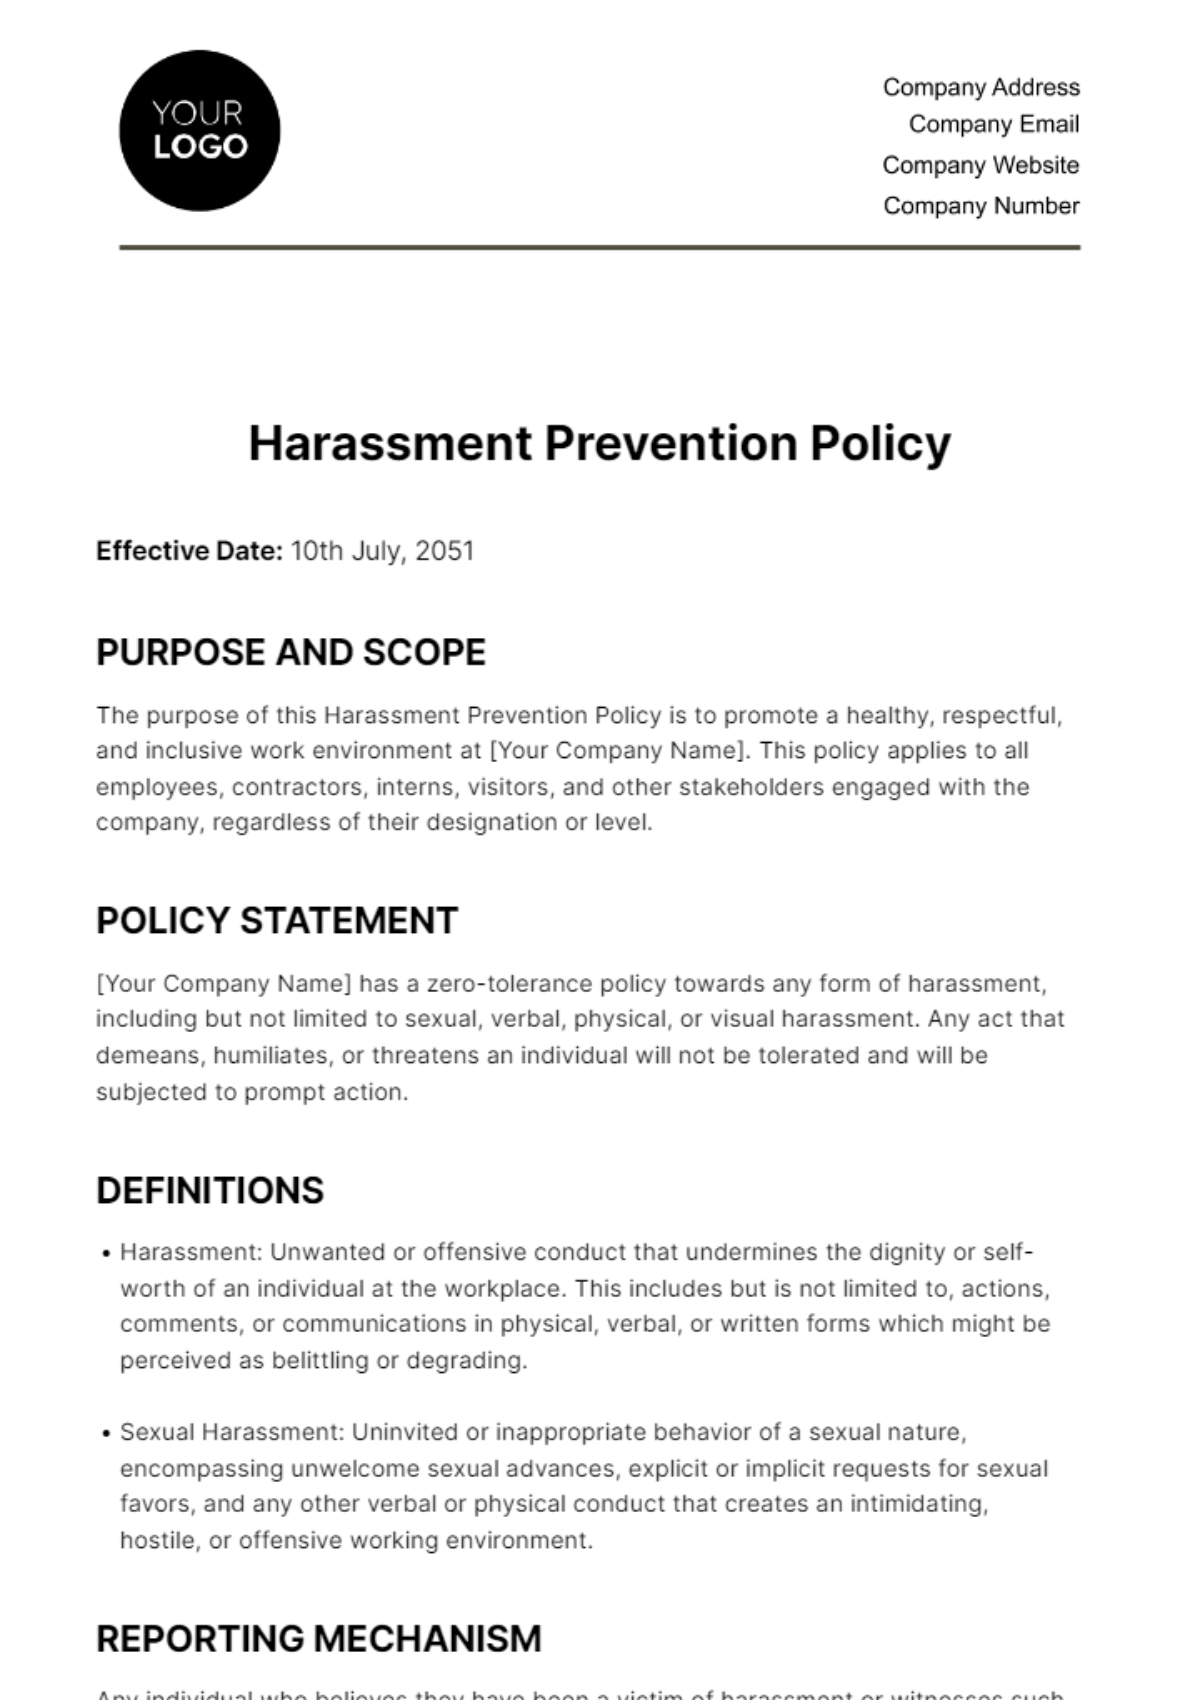 Harassment Prevention Policy HR Template